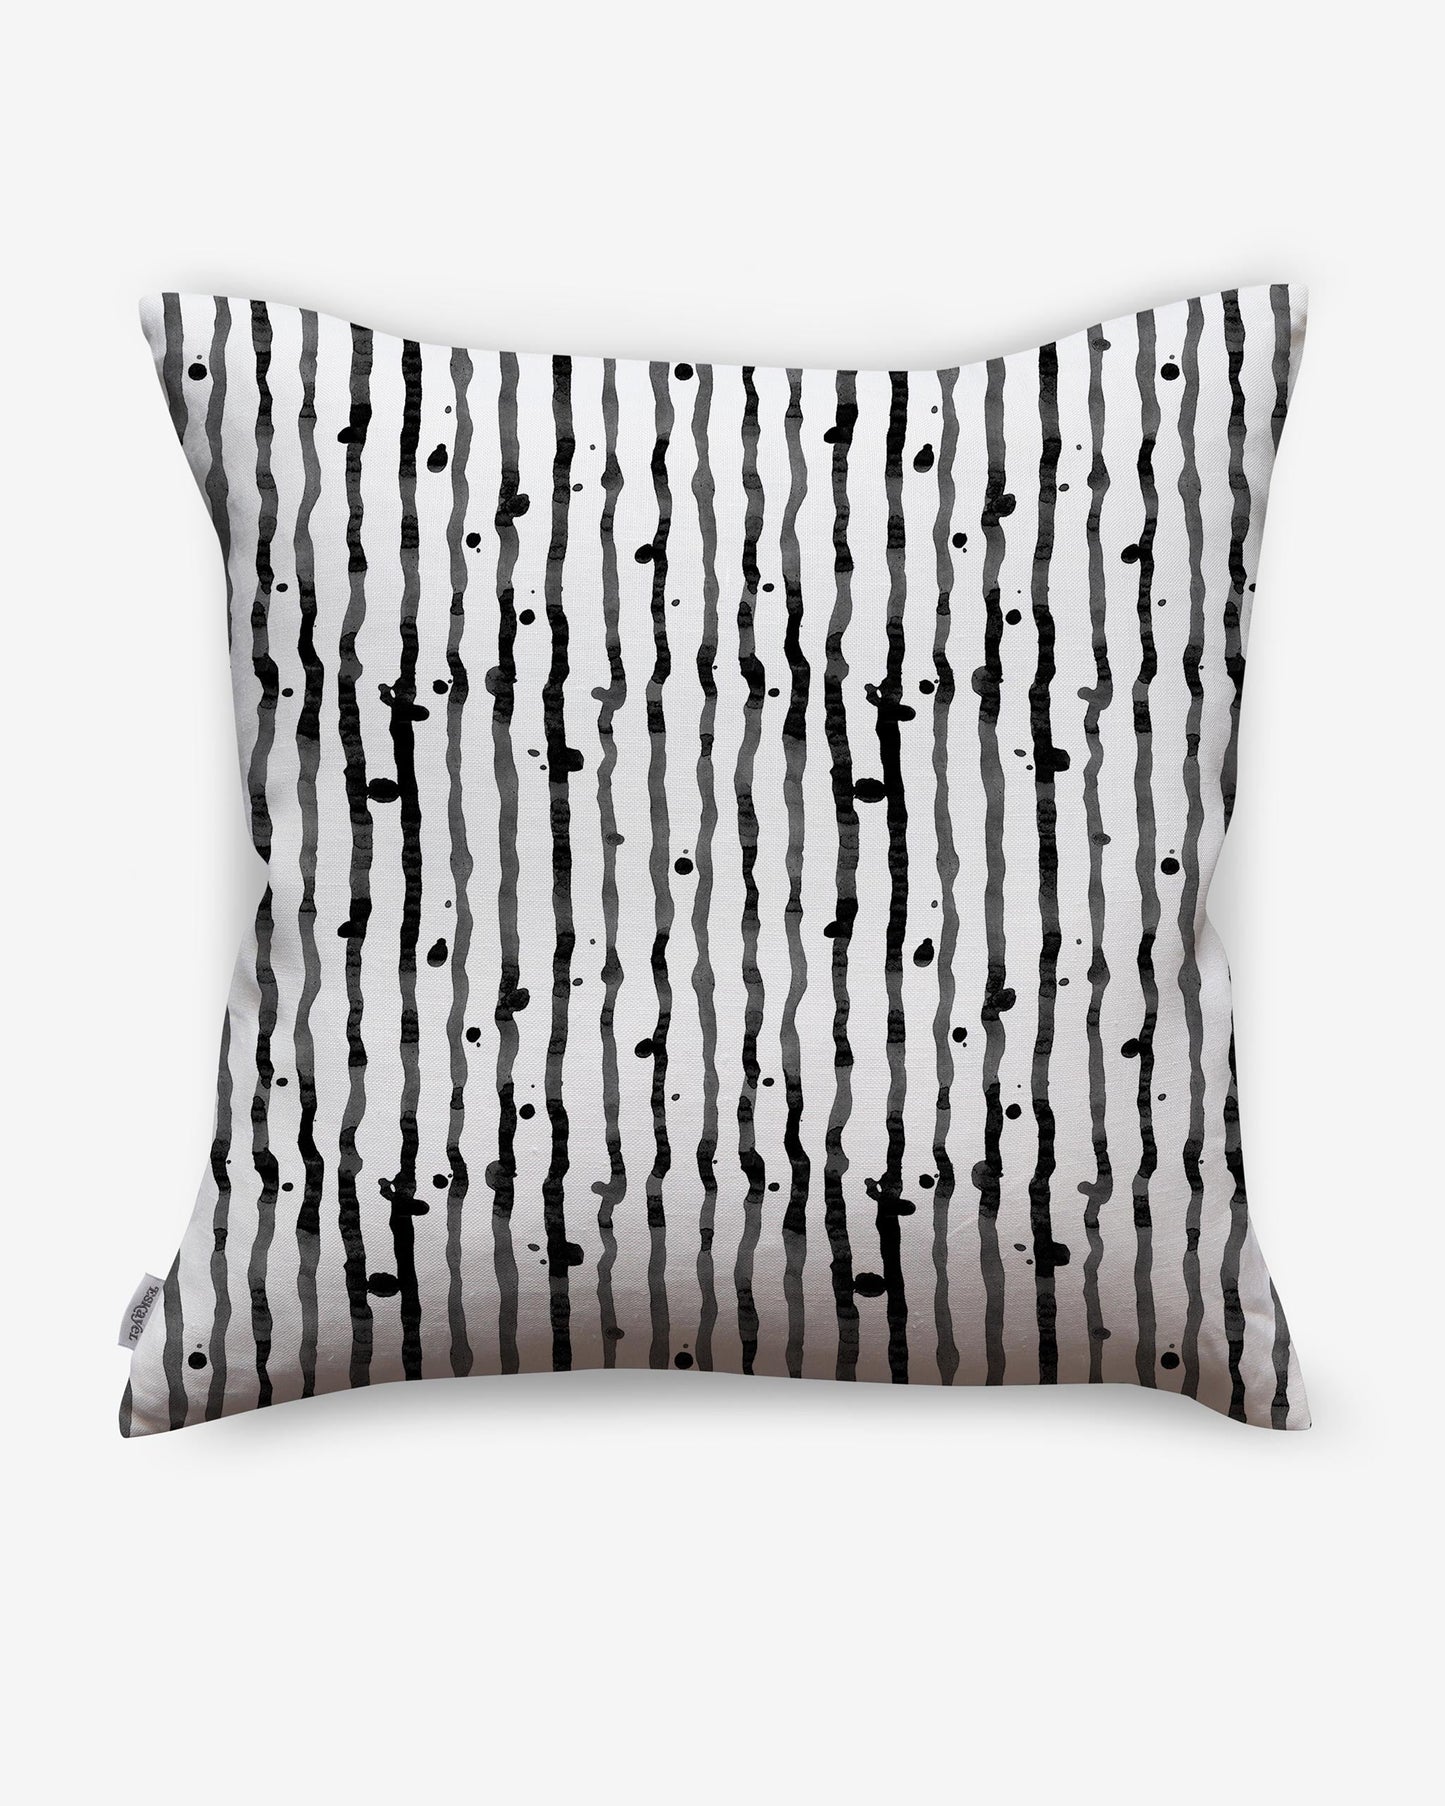 A luxurious high-end Drippy Stripe Pillow||Slate with black and white Drippy Stripe on it.